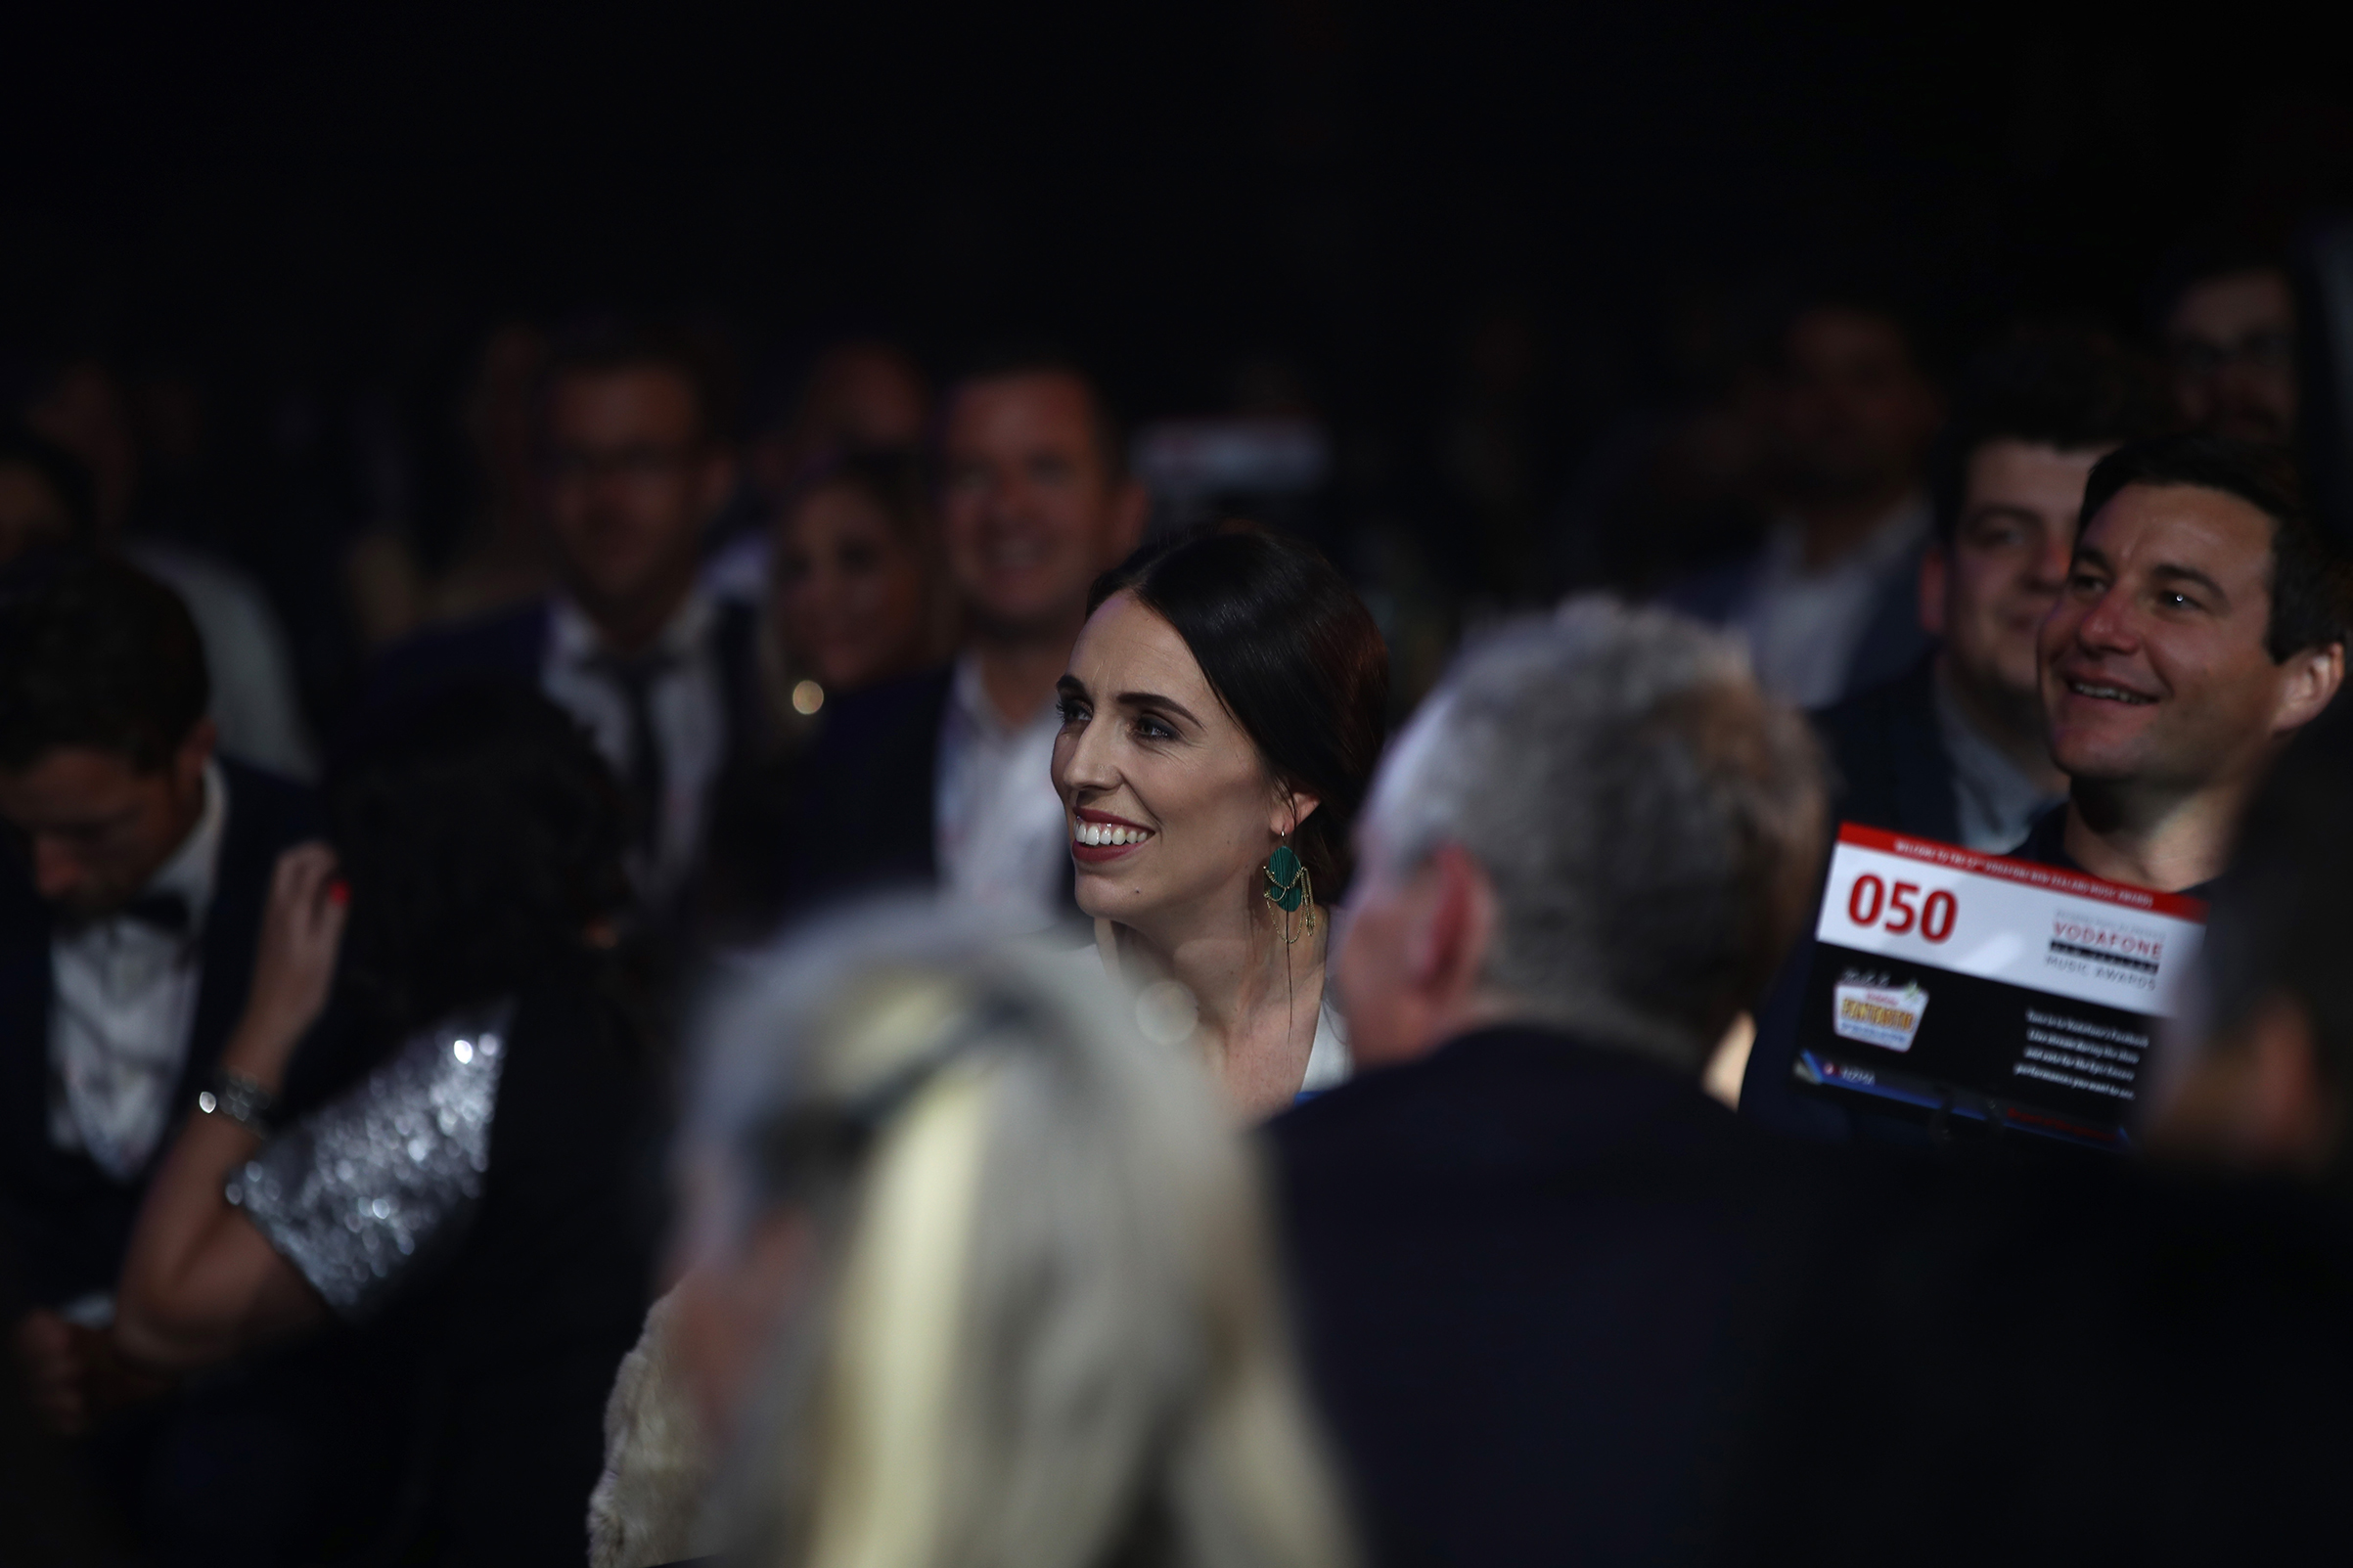 Prime Minister Jacinda Ardern attends an awards show in Auckland, New Zealand, on Nov. 16, 2017. (Phil Walter—Getty Images)